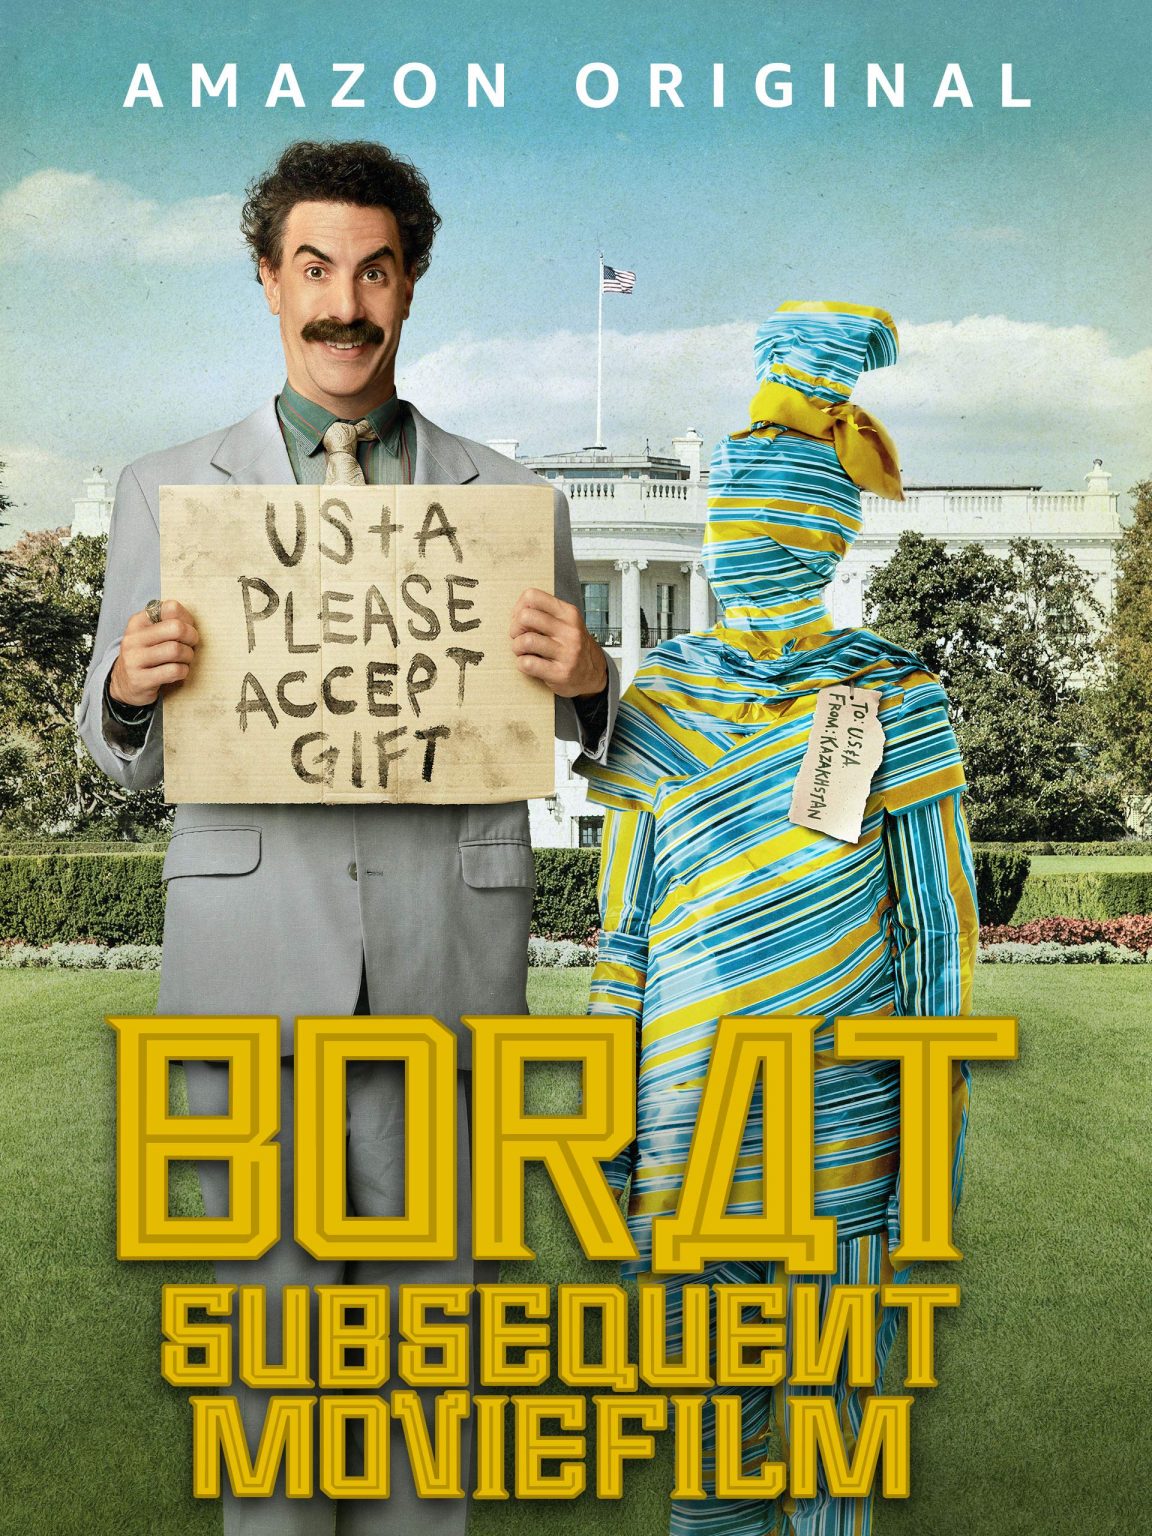 Borat Subsequent MovieFilm Review ? | Fandom Insights